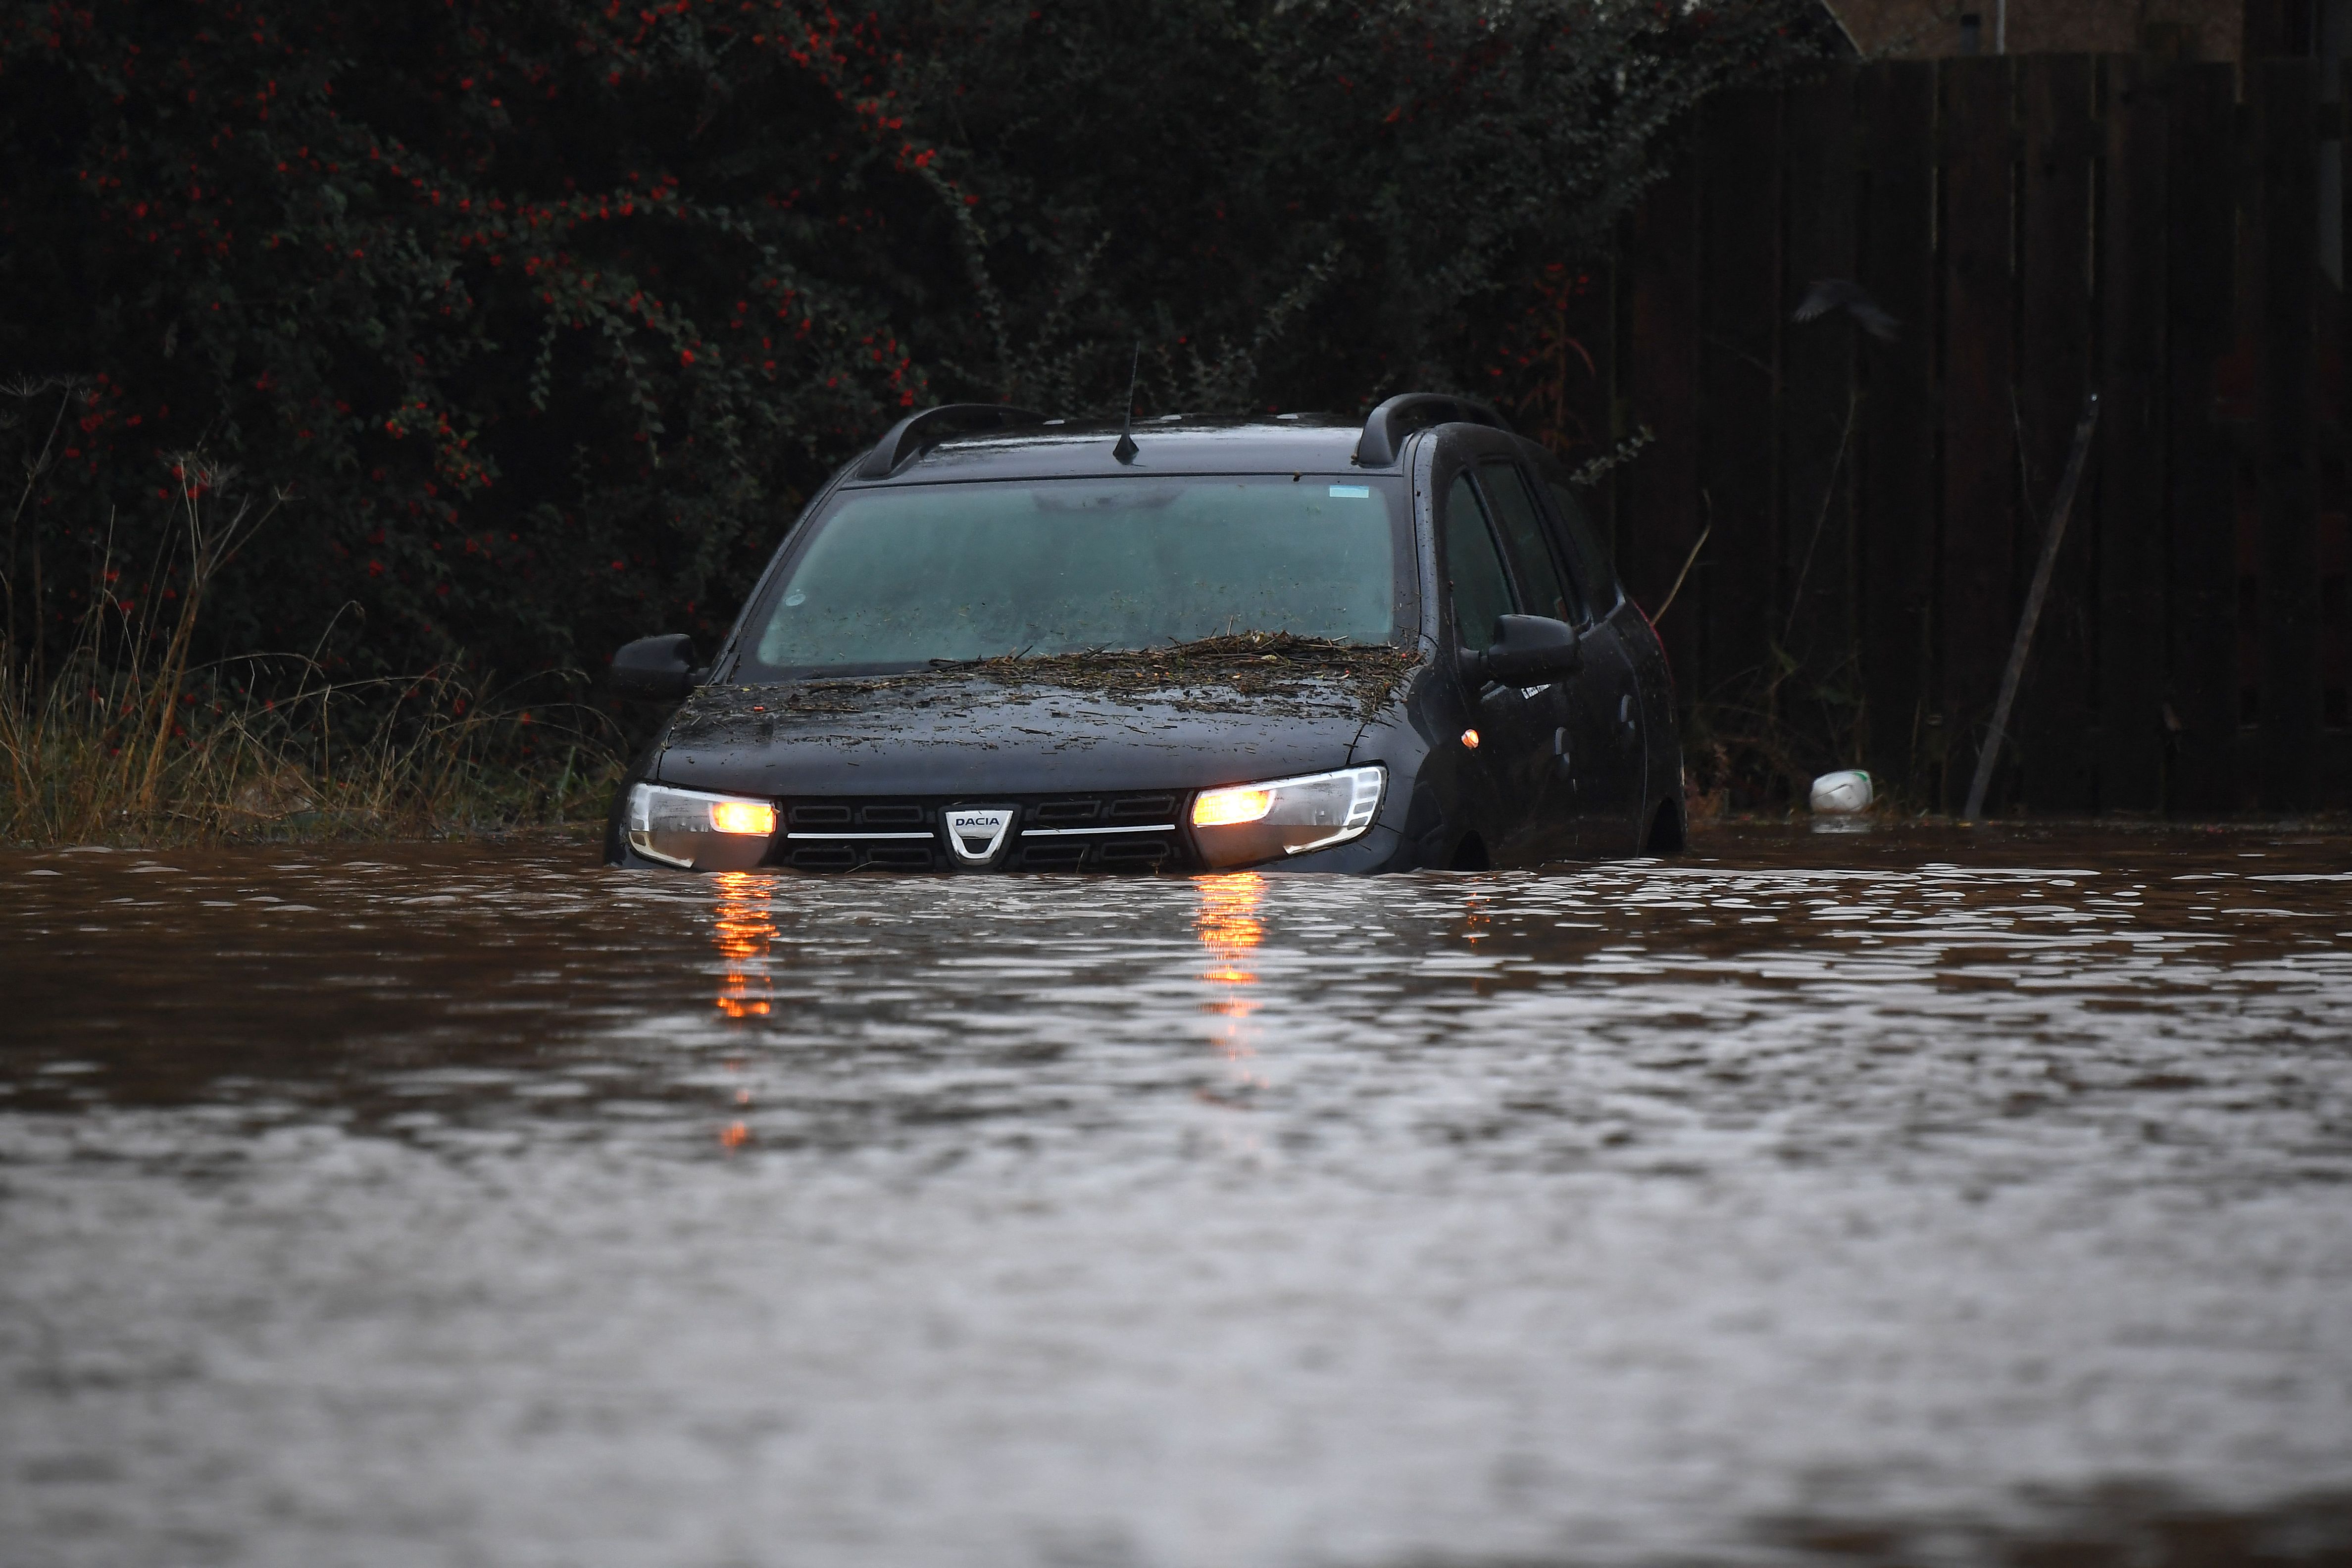 Parts of eastern Scotland have been hit with severe flooding as rain pours on already saturated grounds.